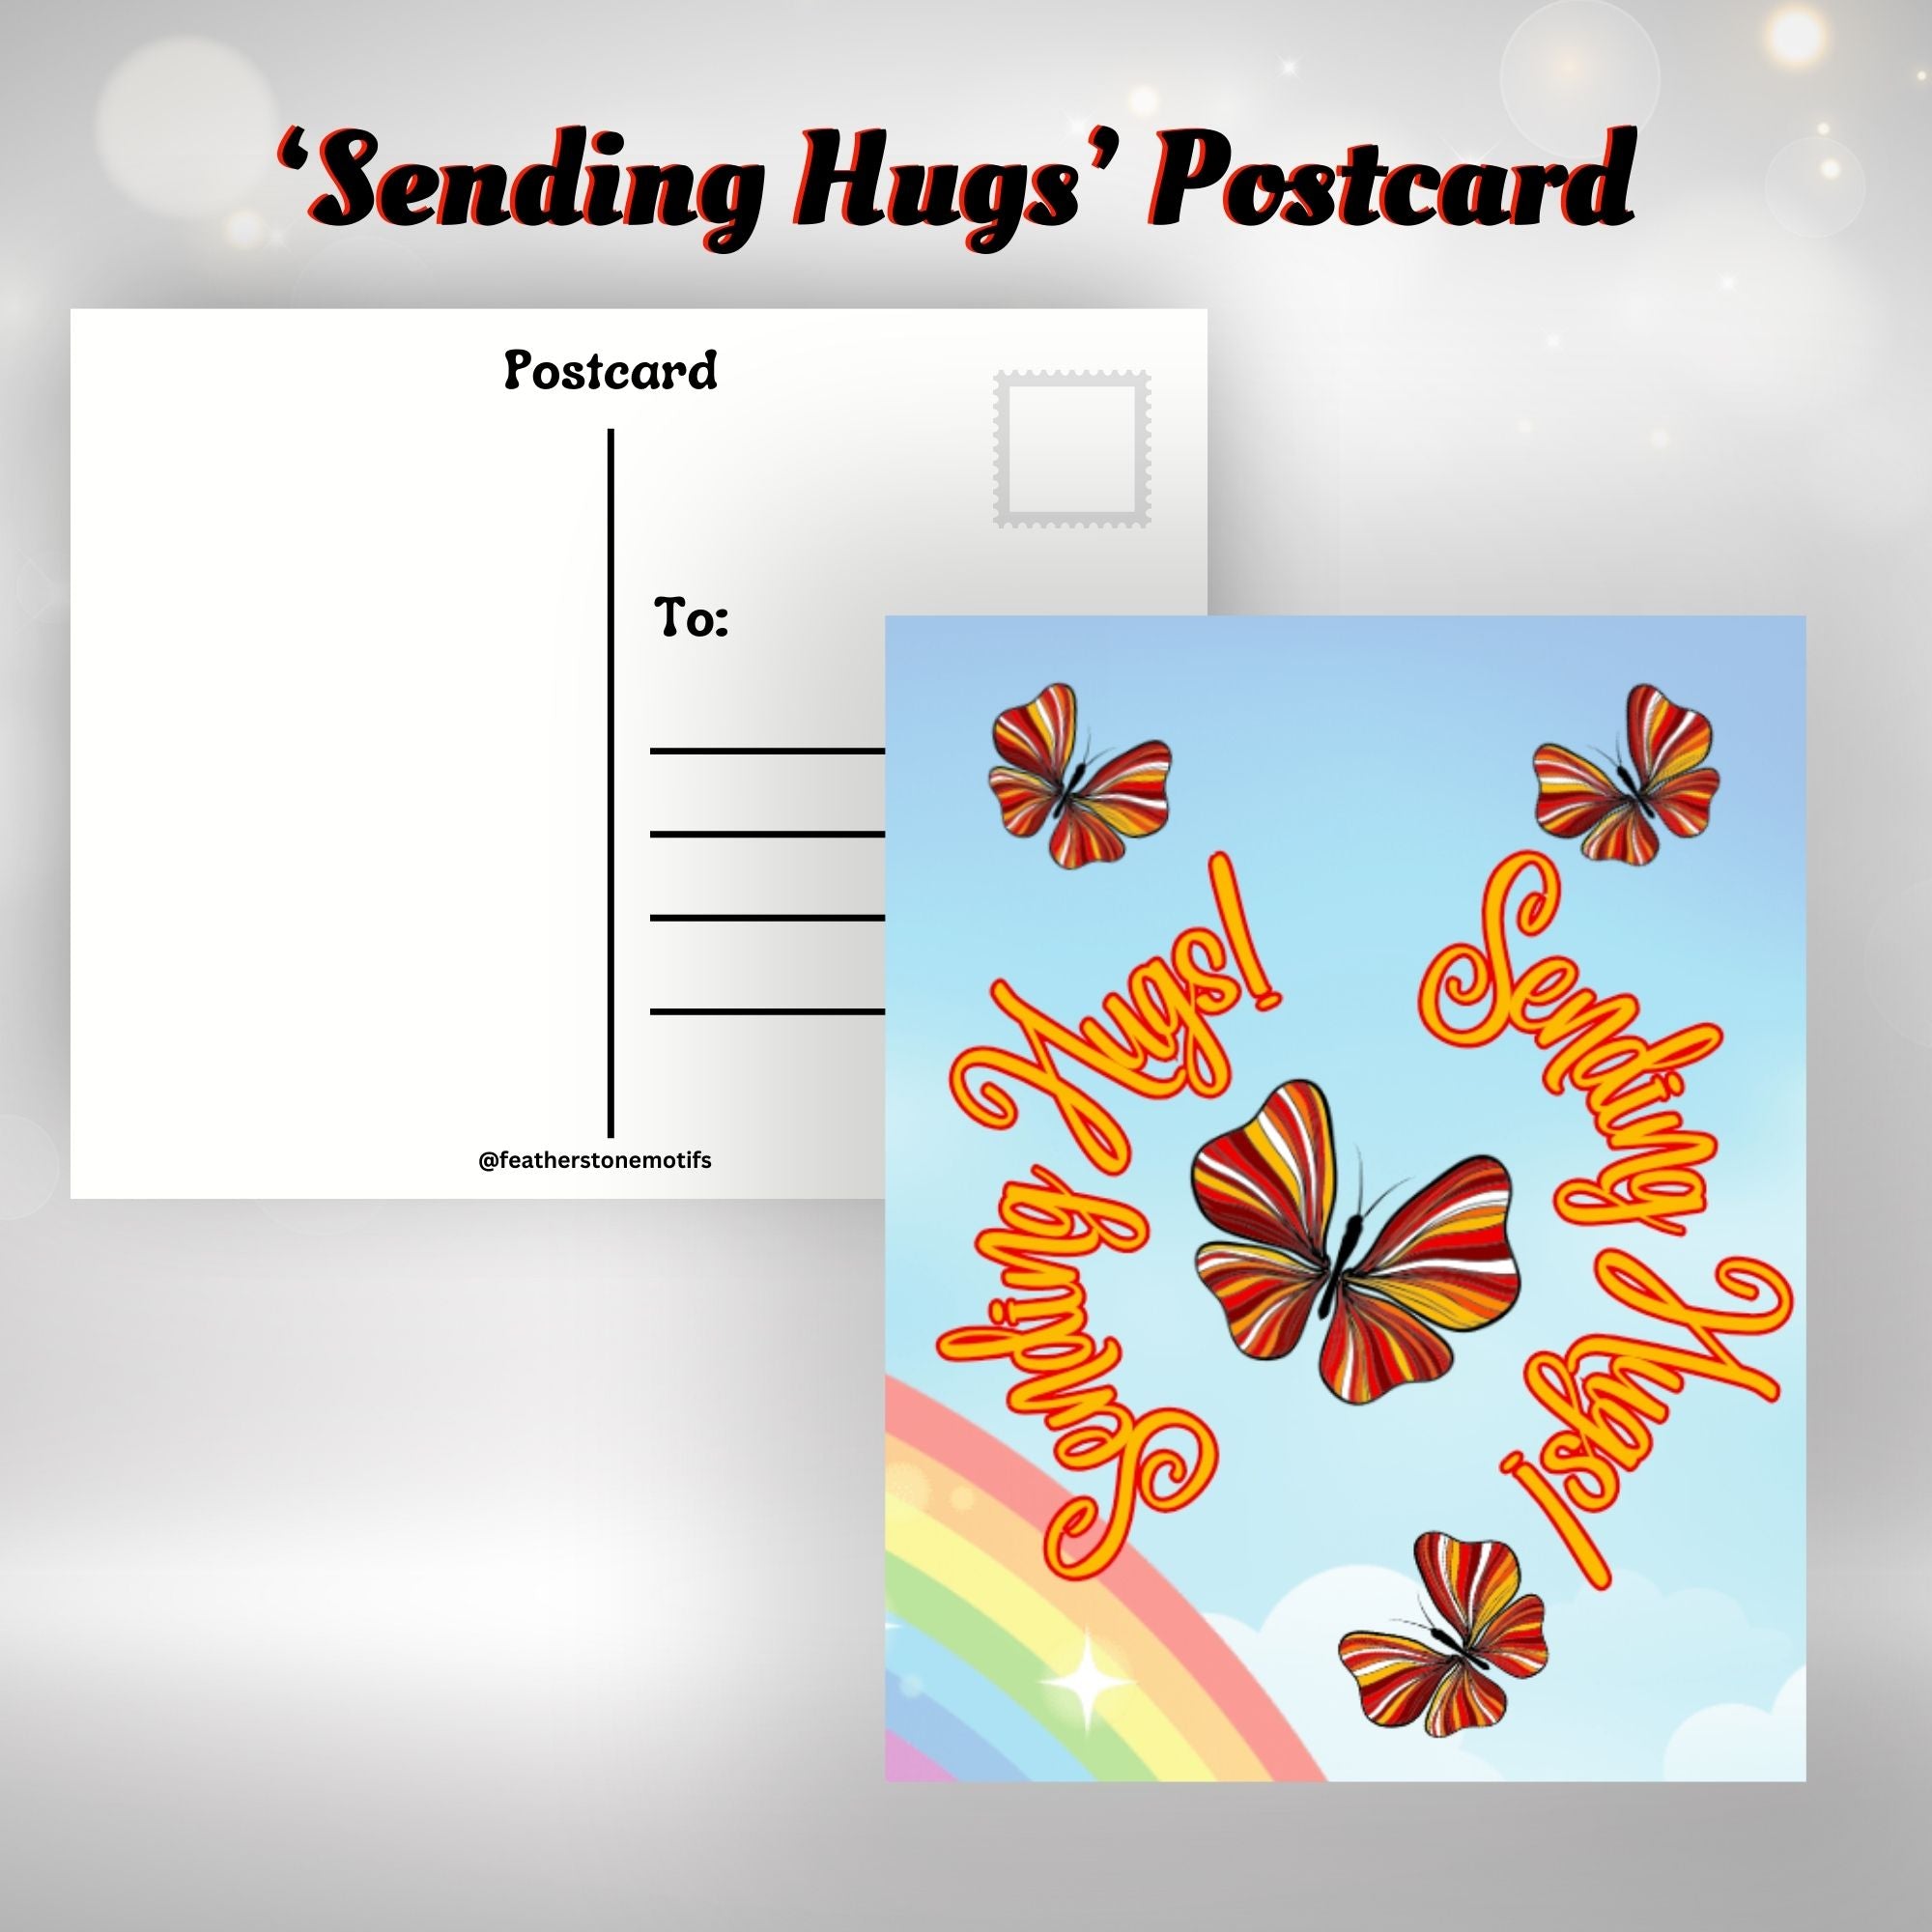 This image shows the Sending Hugs! postcard with multicolor orange butterfies in front of a rainbow.